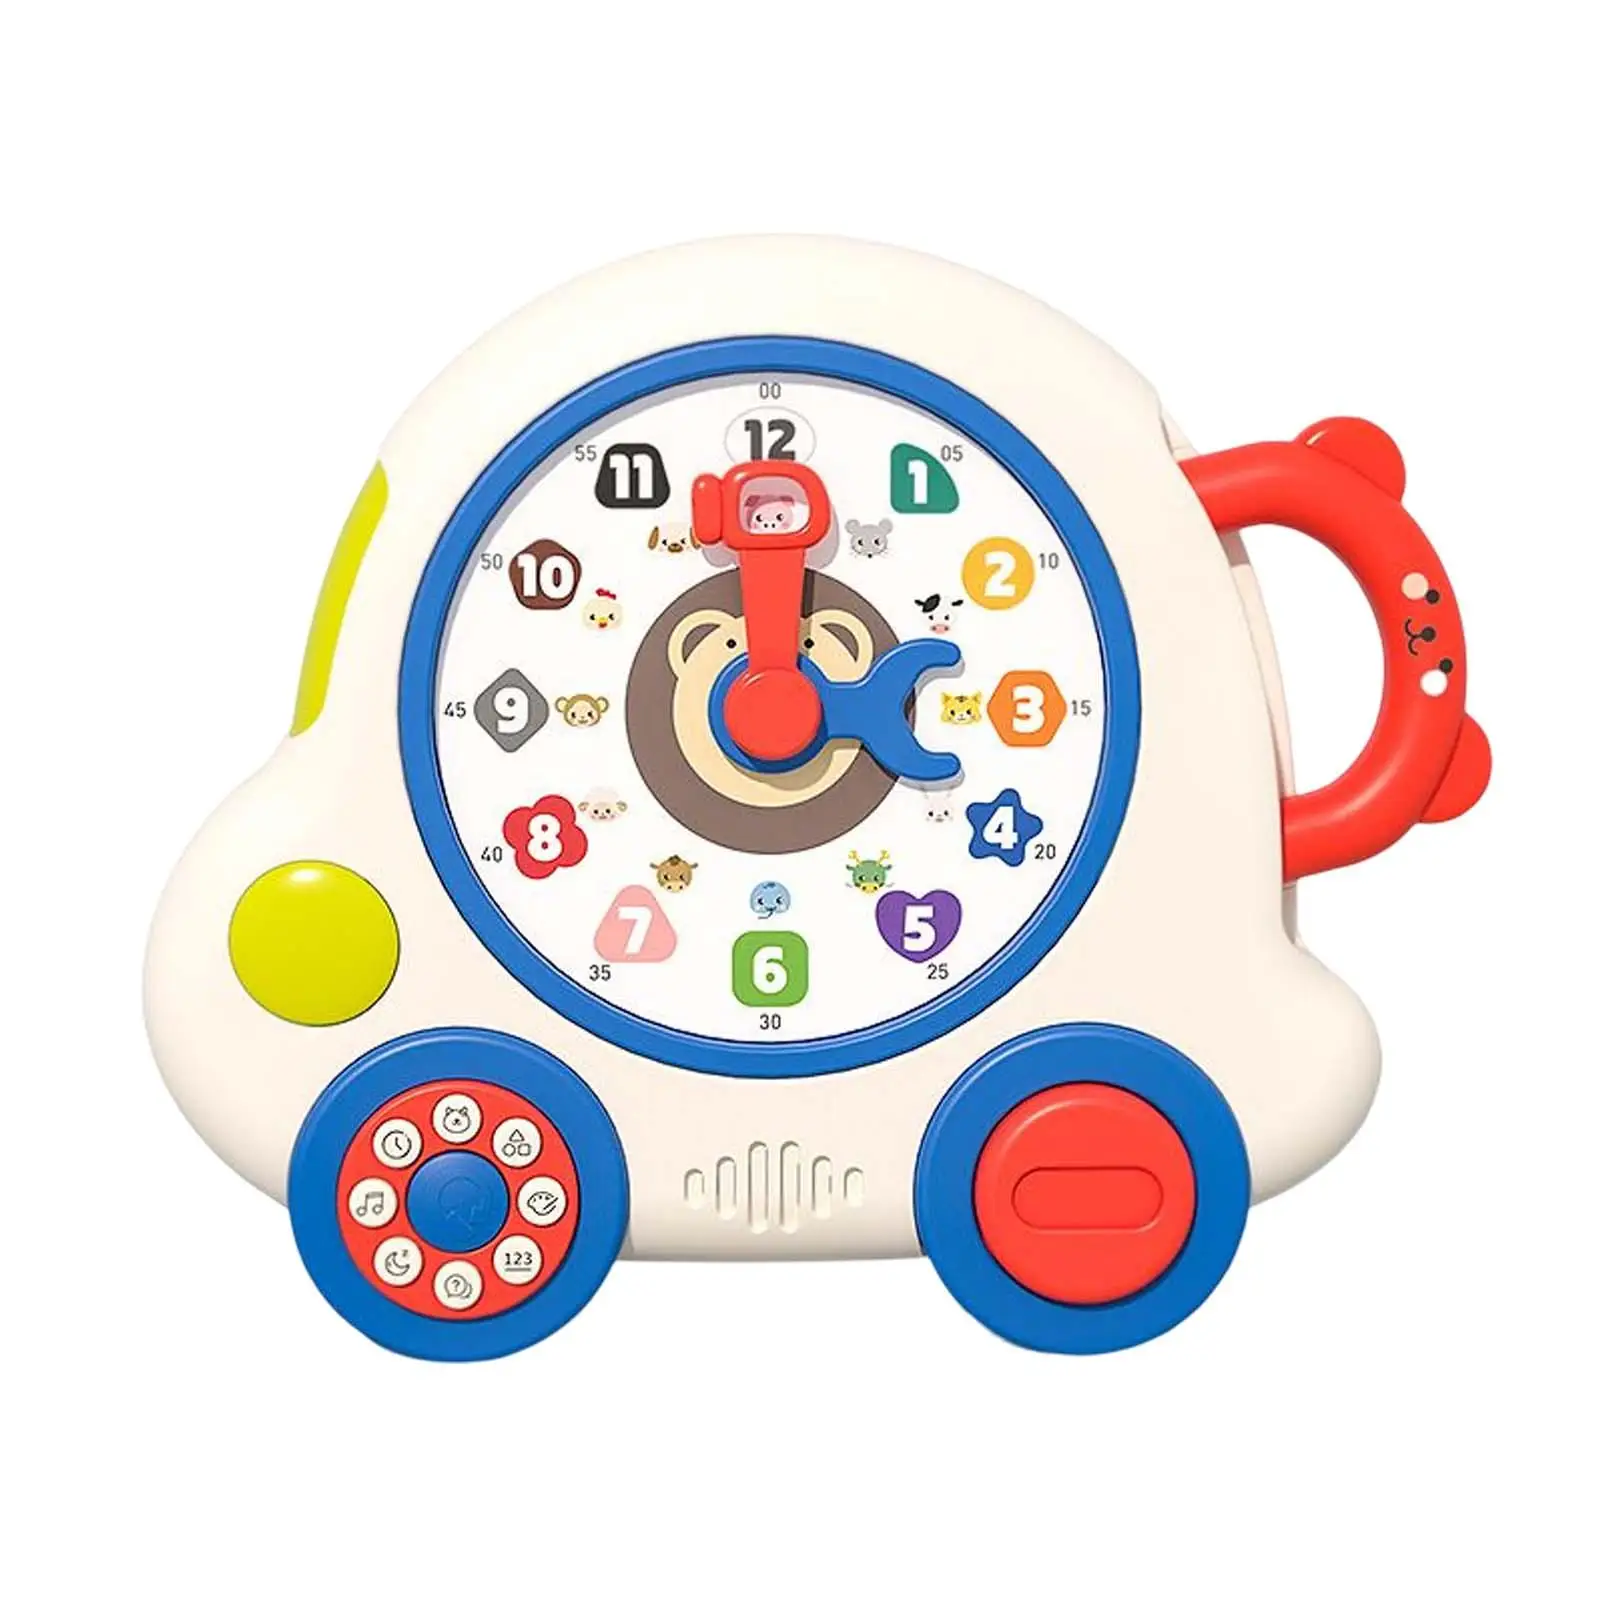 Kids Clock Learning Machine Portable Multiple Modes Enlightenment Educational Electronic Interactive Learning Toy for Boys Girls